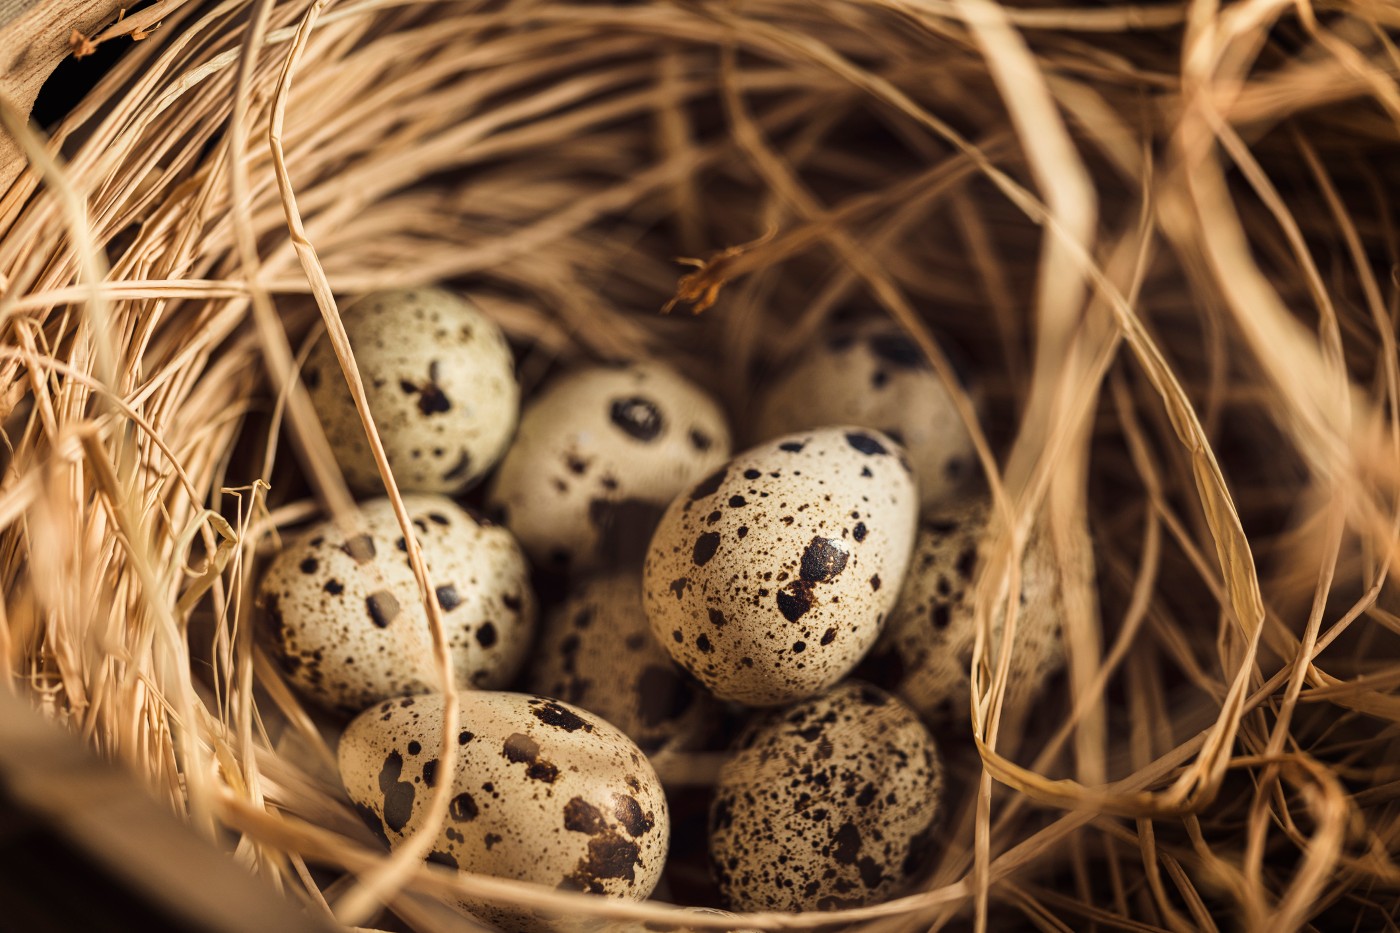 https://tickertapecdn.tdameritrade.com/assets/images/pages/md/Eggs in a nest: Retirement income nest egg